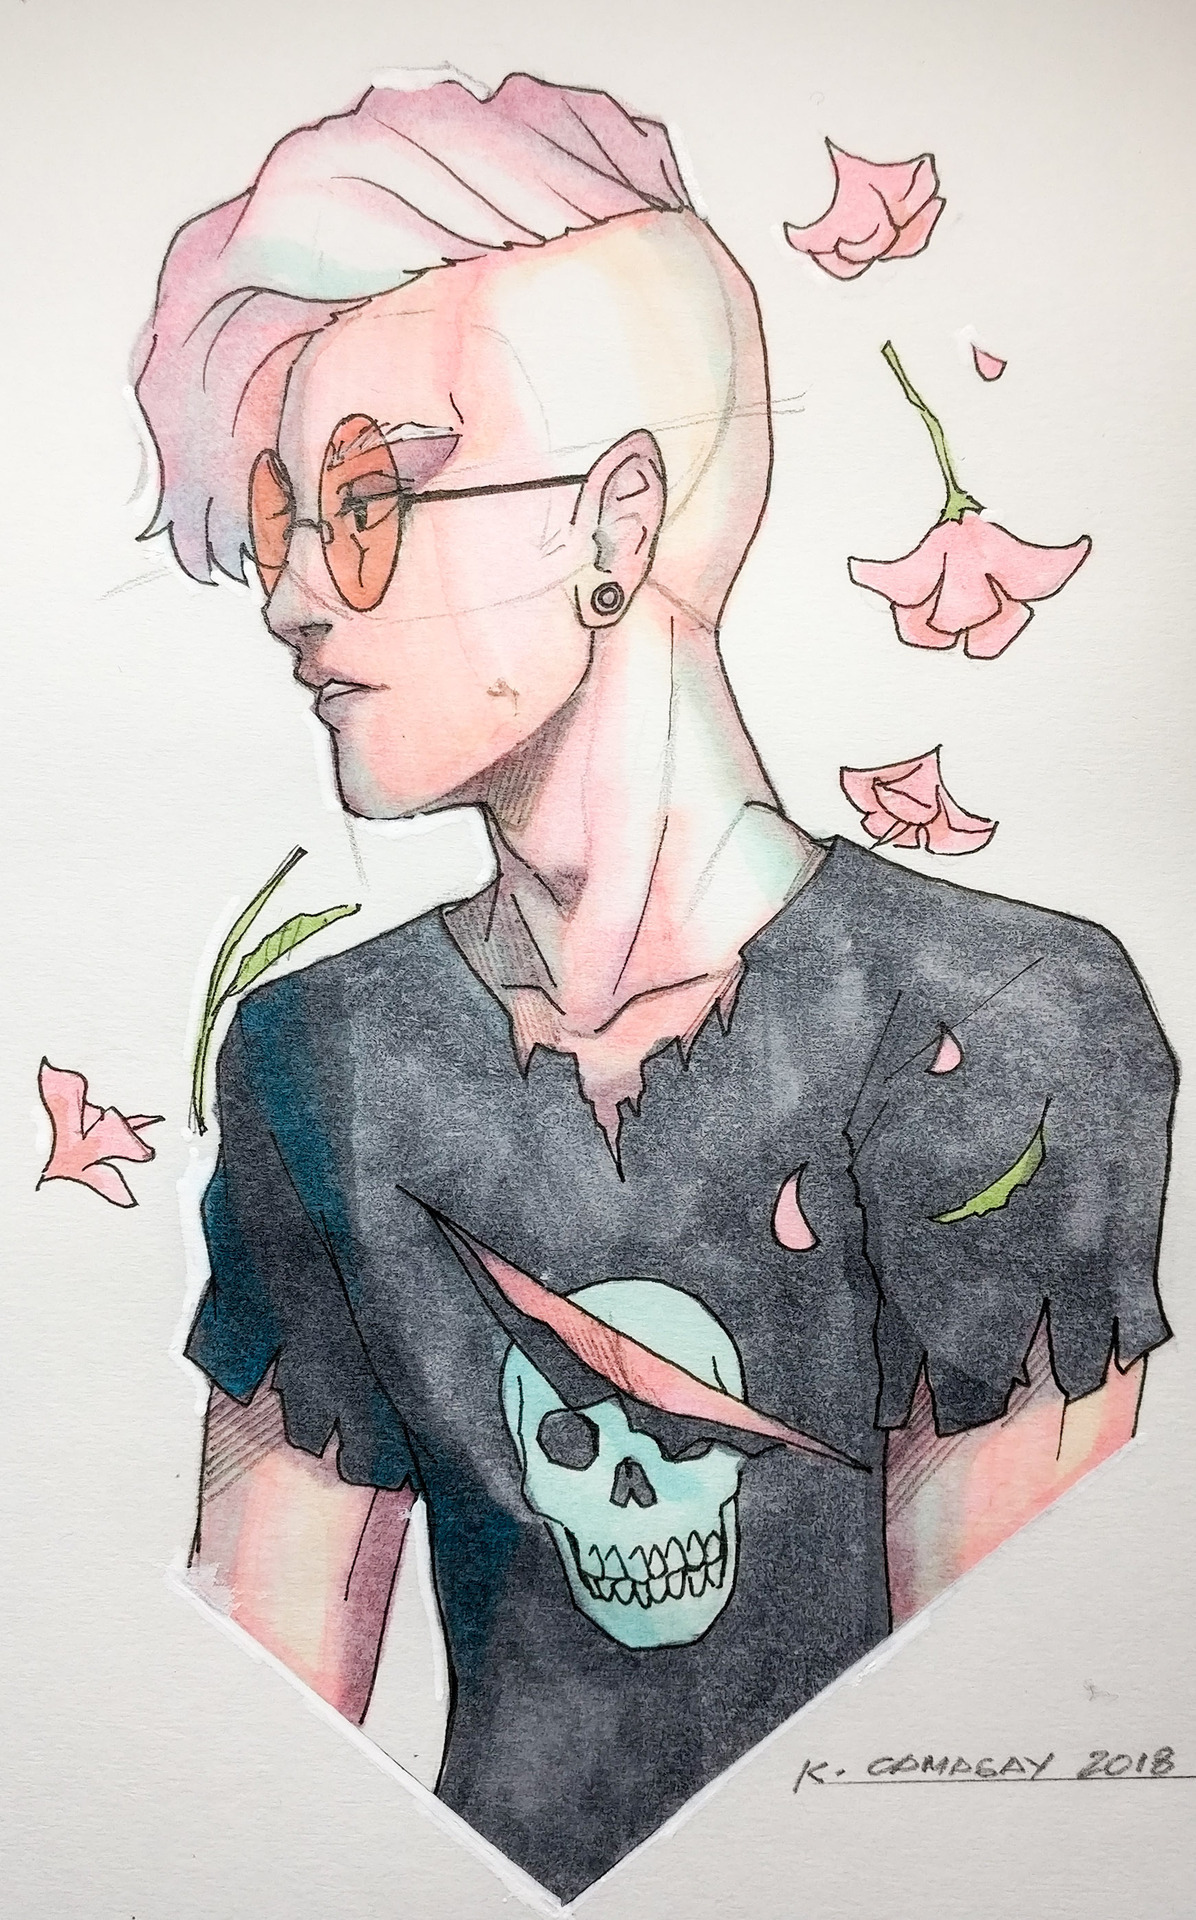 Quick colored sketch of Lars I did about two months ago. He he… Rose colored boy.